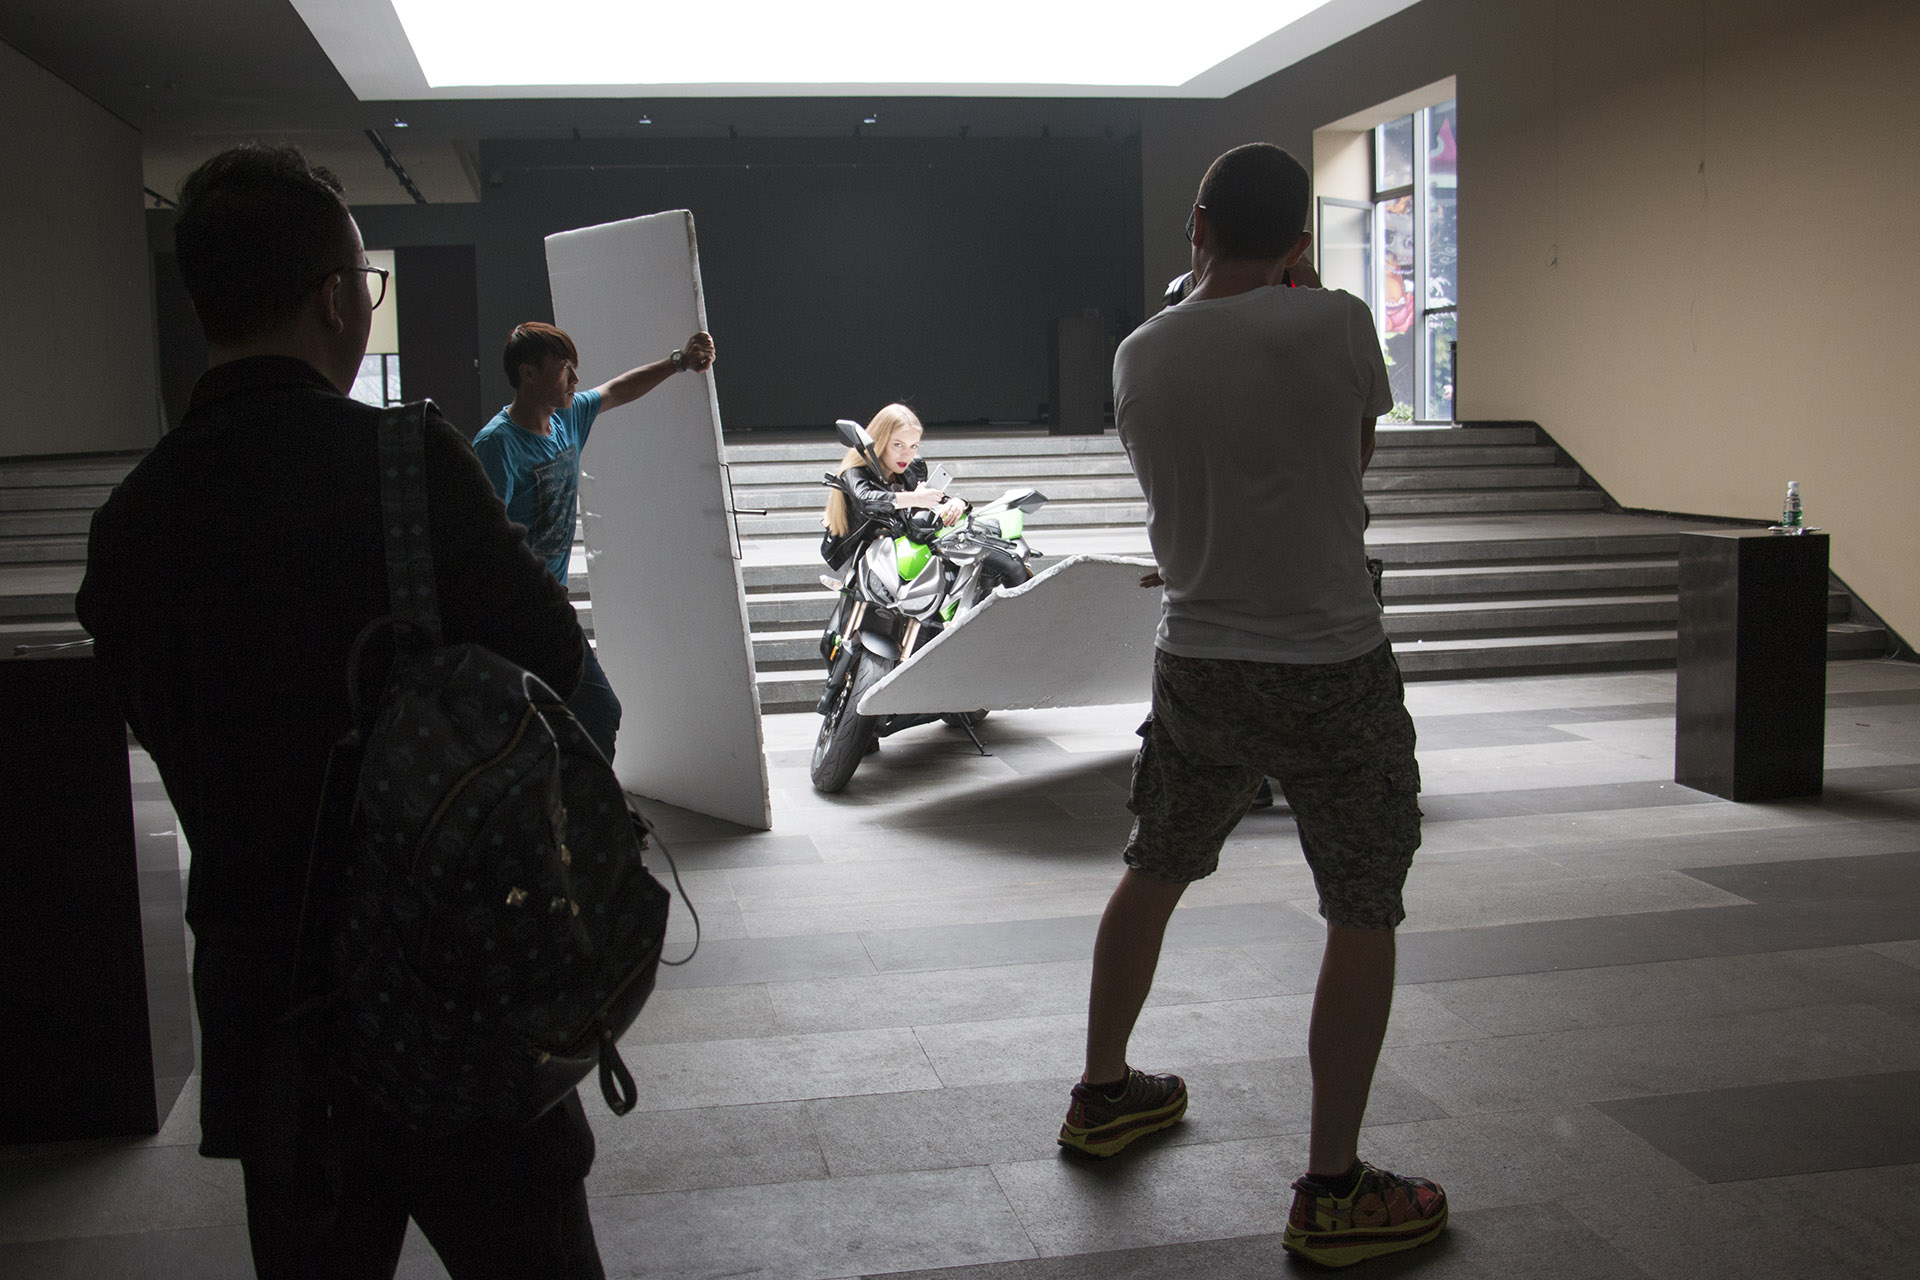 Photographer photographing a model on a motorcycle in an art gallery China